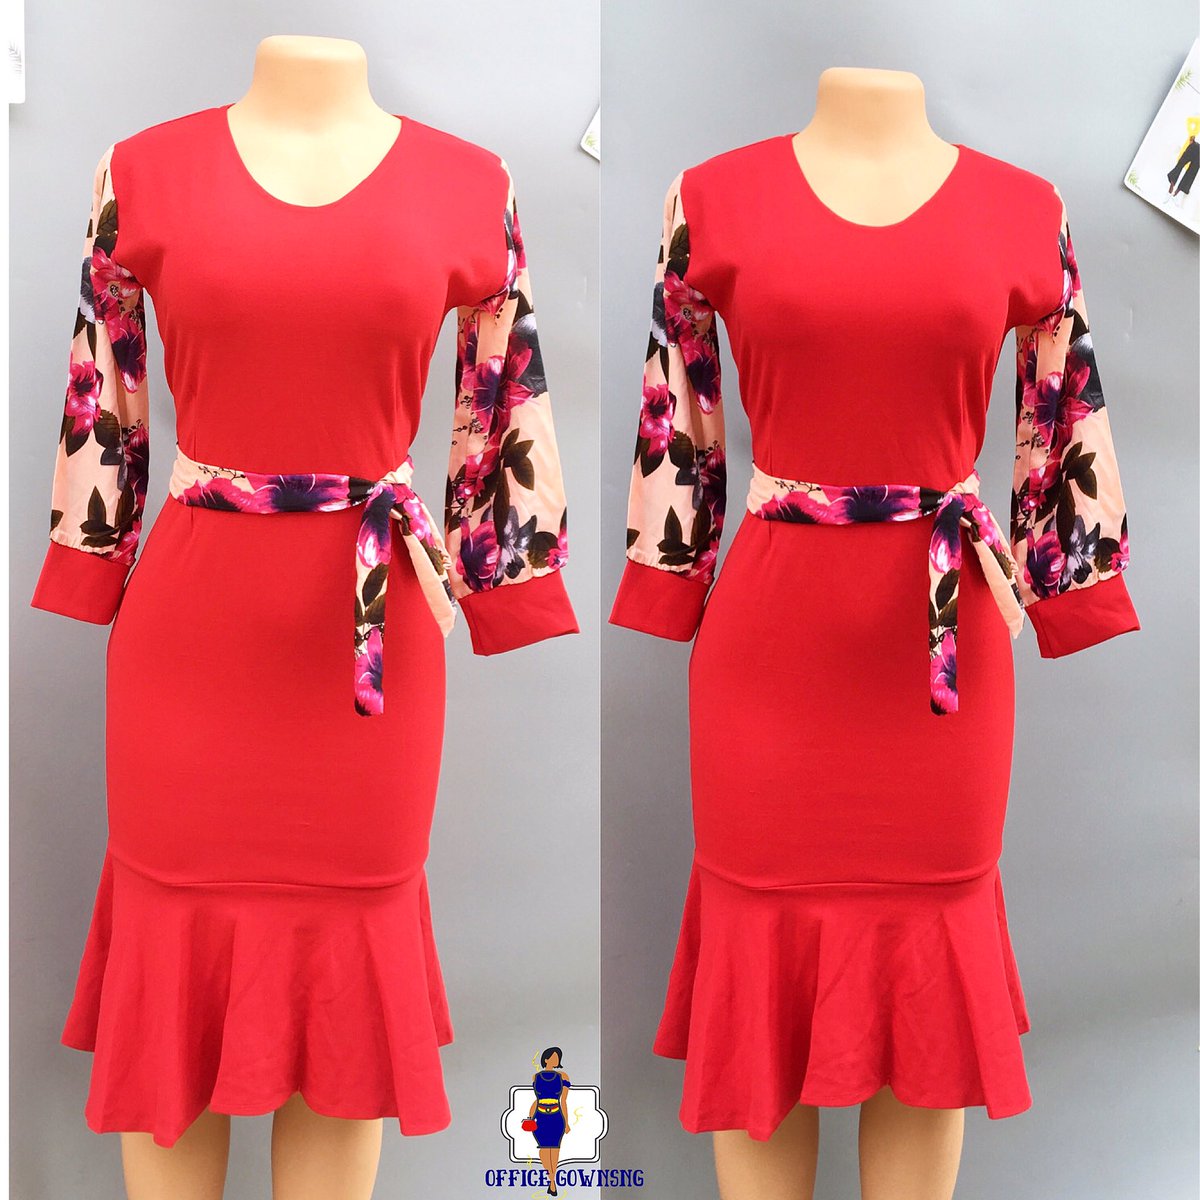 NEW IN
Scarlet Flowerprint dress
Stretchy ✅
Size - 10/12
Price - 3900
Kindly send a DM to order 
Delivery is in 24hours within Lagos.
Simi | Officewear | corporate gowns